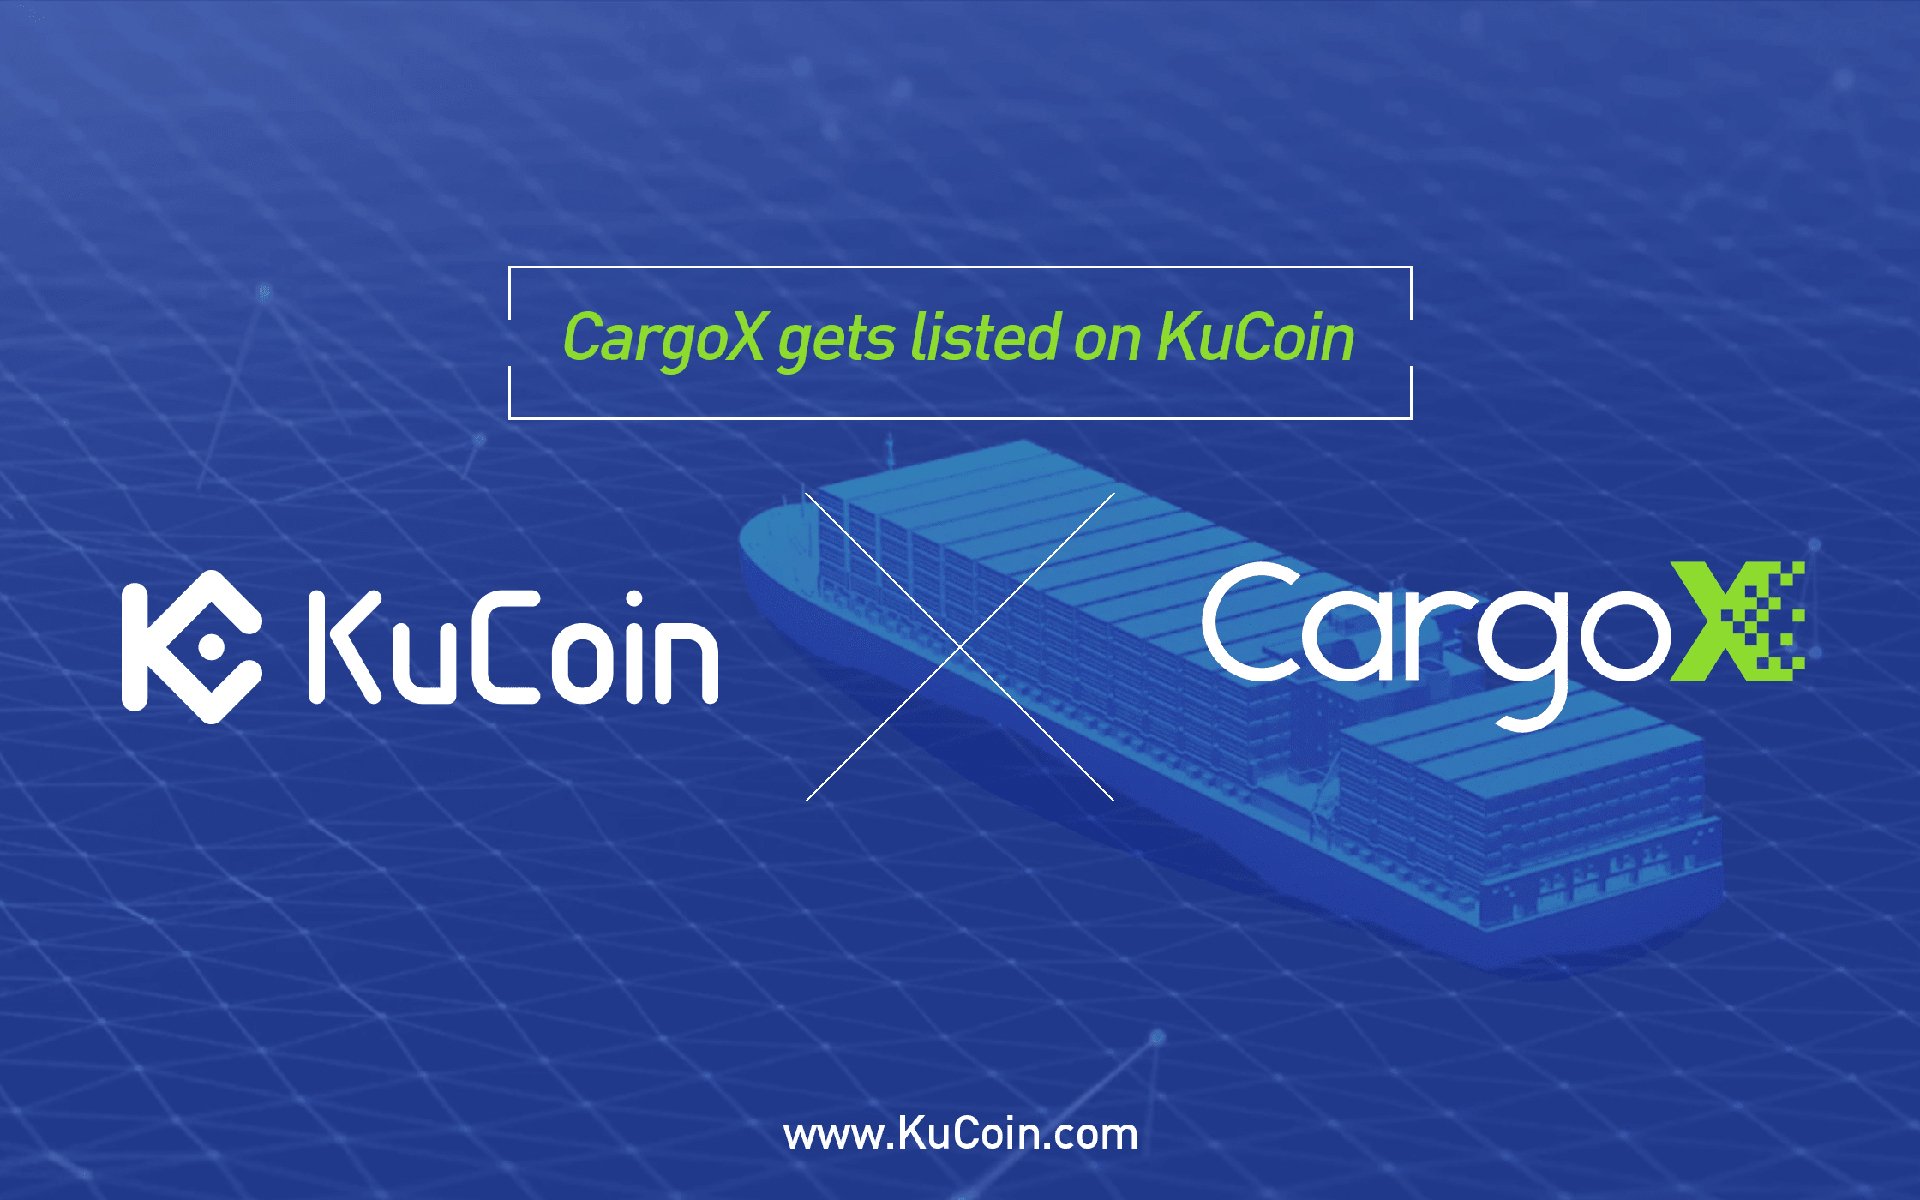 CargoX Gets Listed On KuCoin